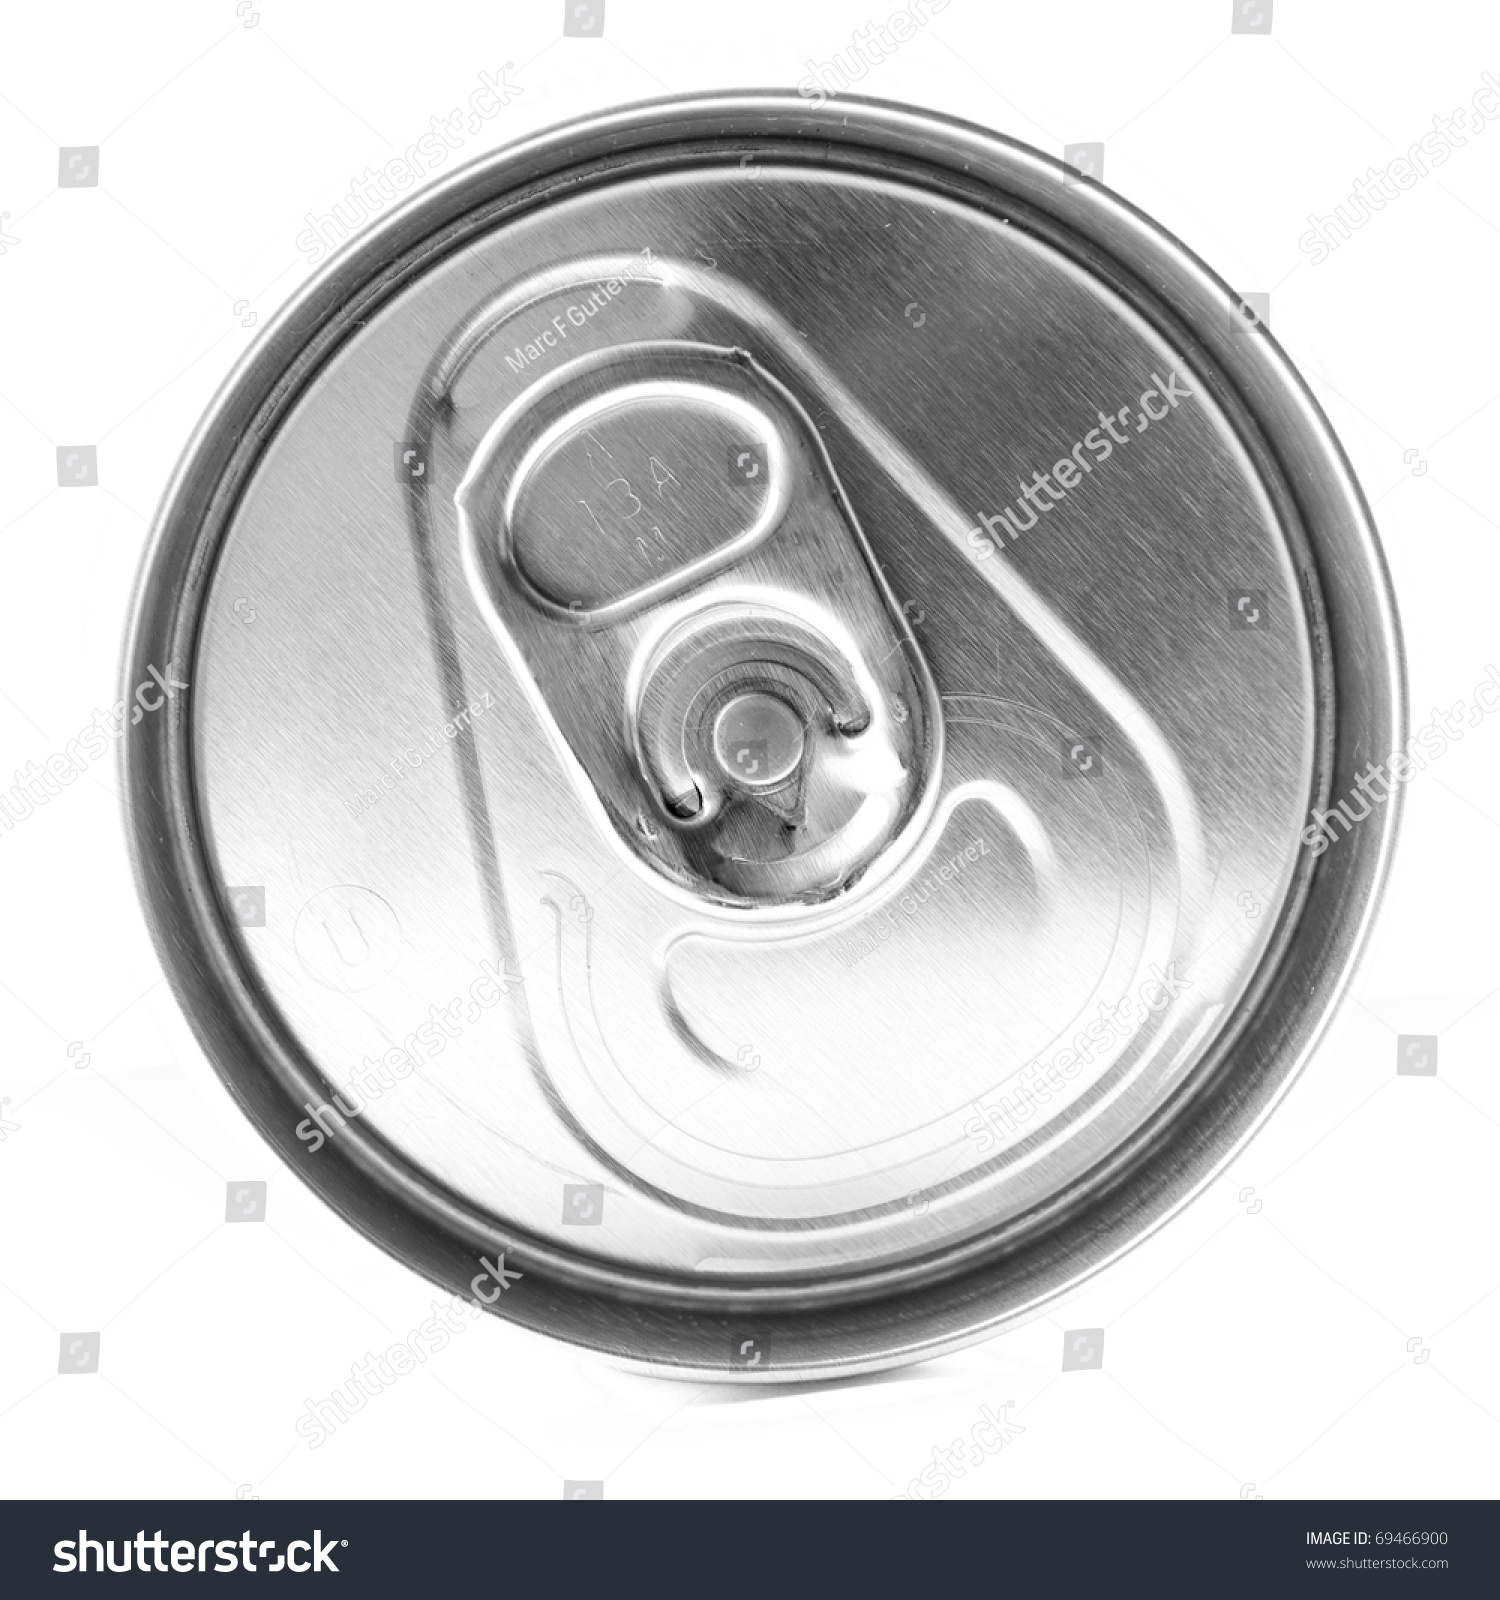 Top Unopened Soda Can On White Stock Photo (Download Now) 69466900 ...